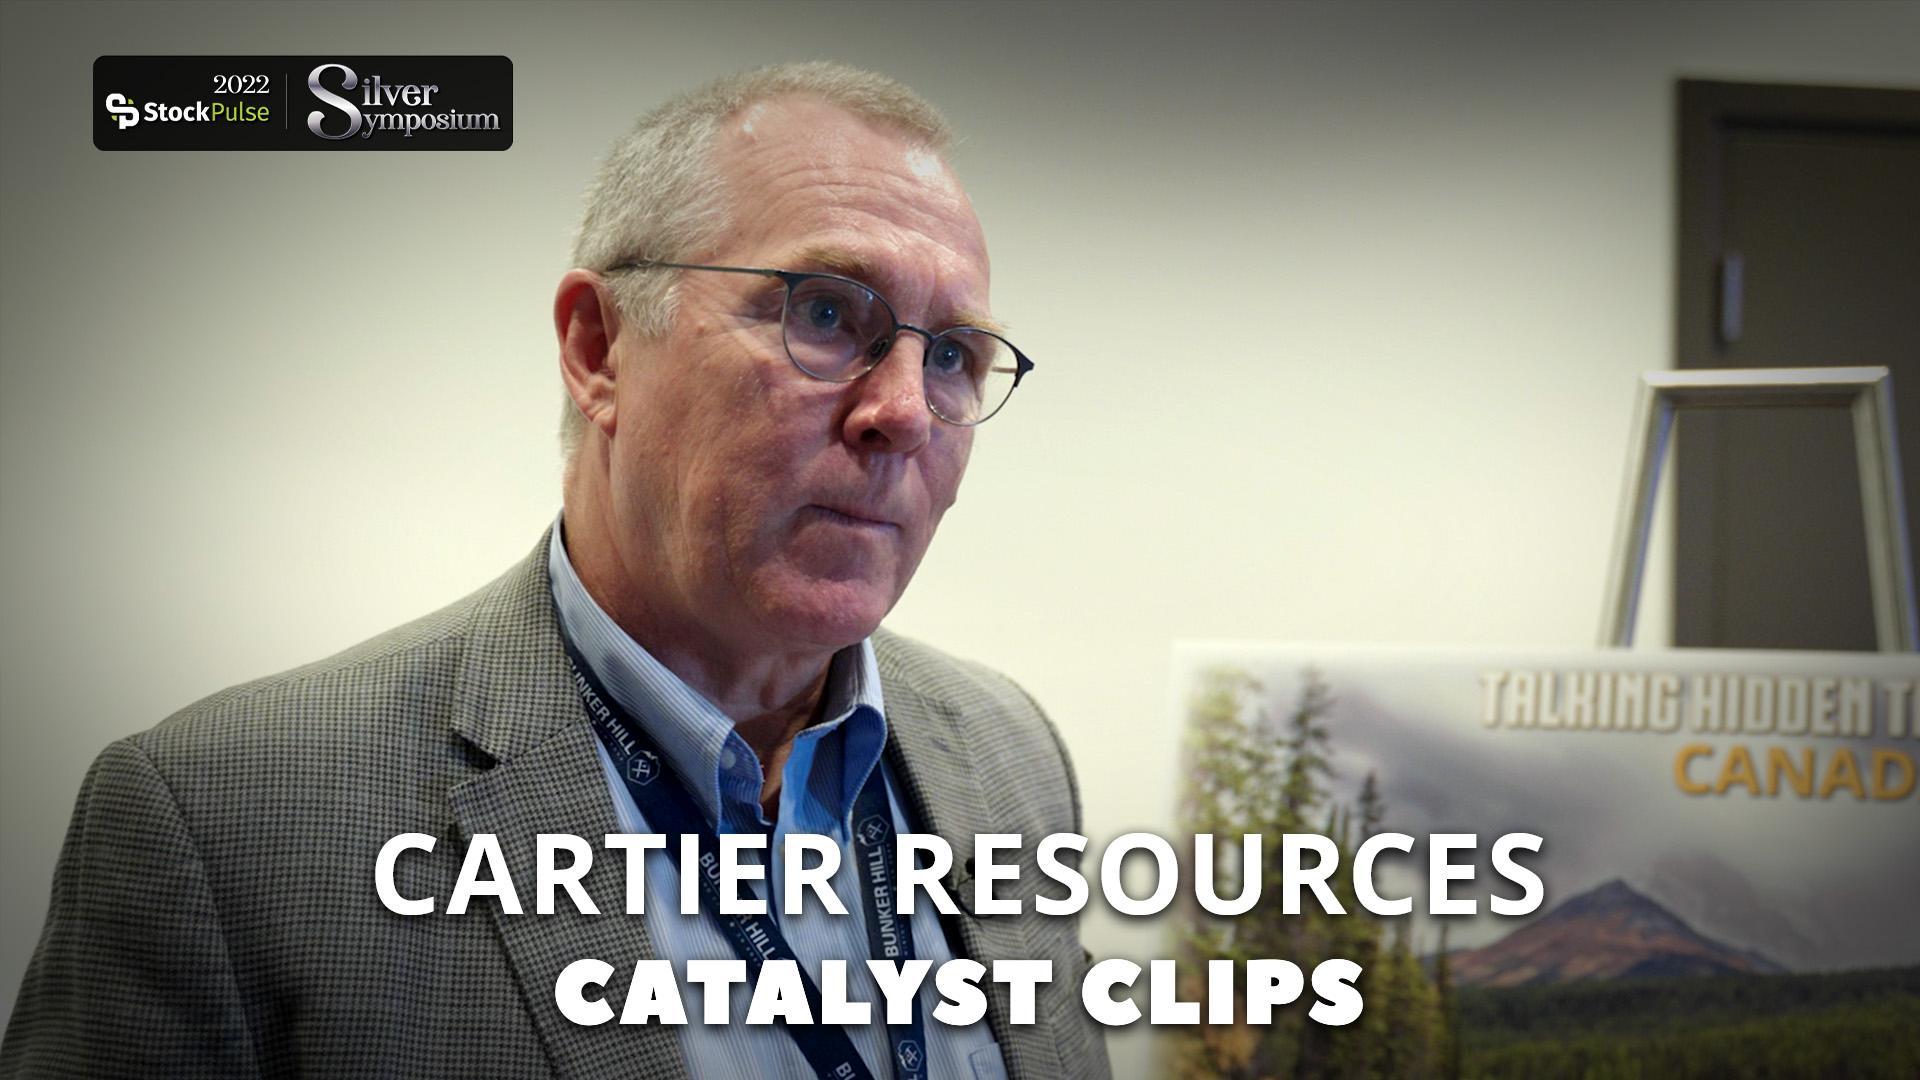 Catalyst Clips | Philippe Cloutier of Cartier Resources